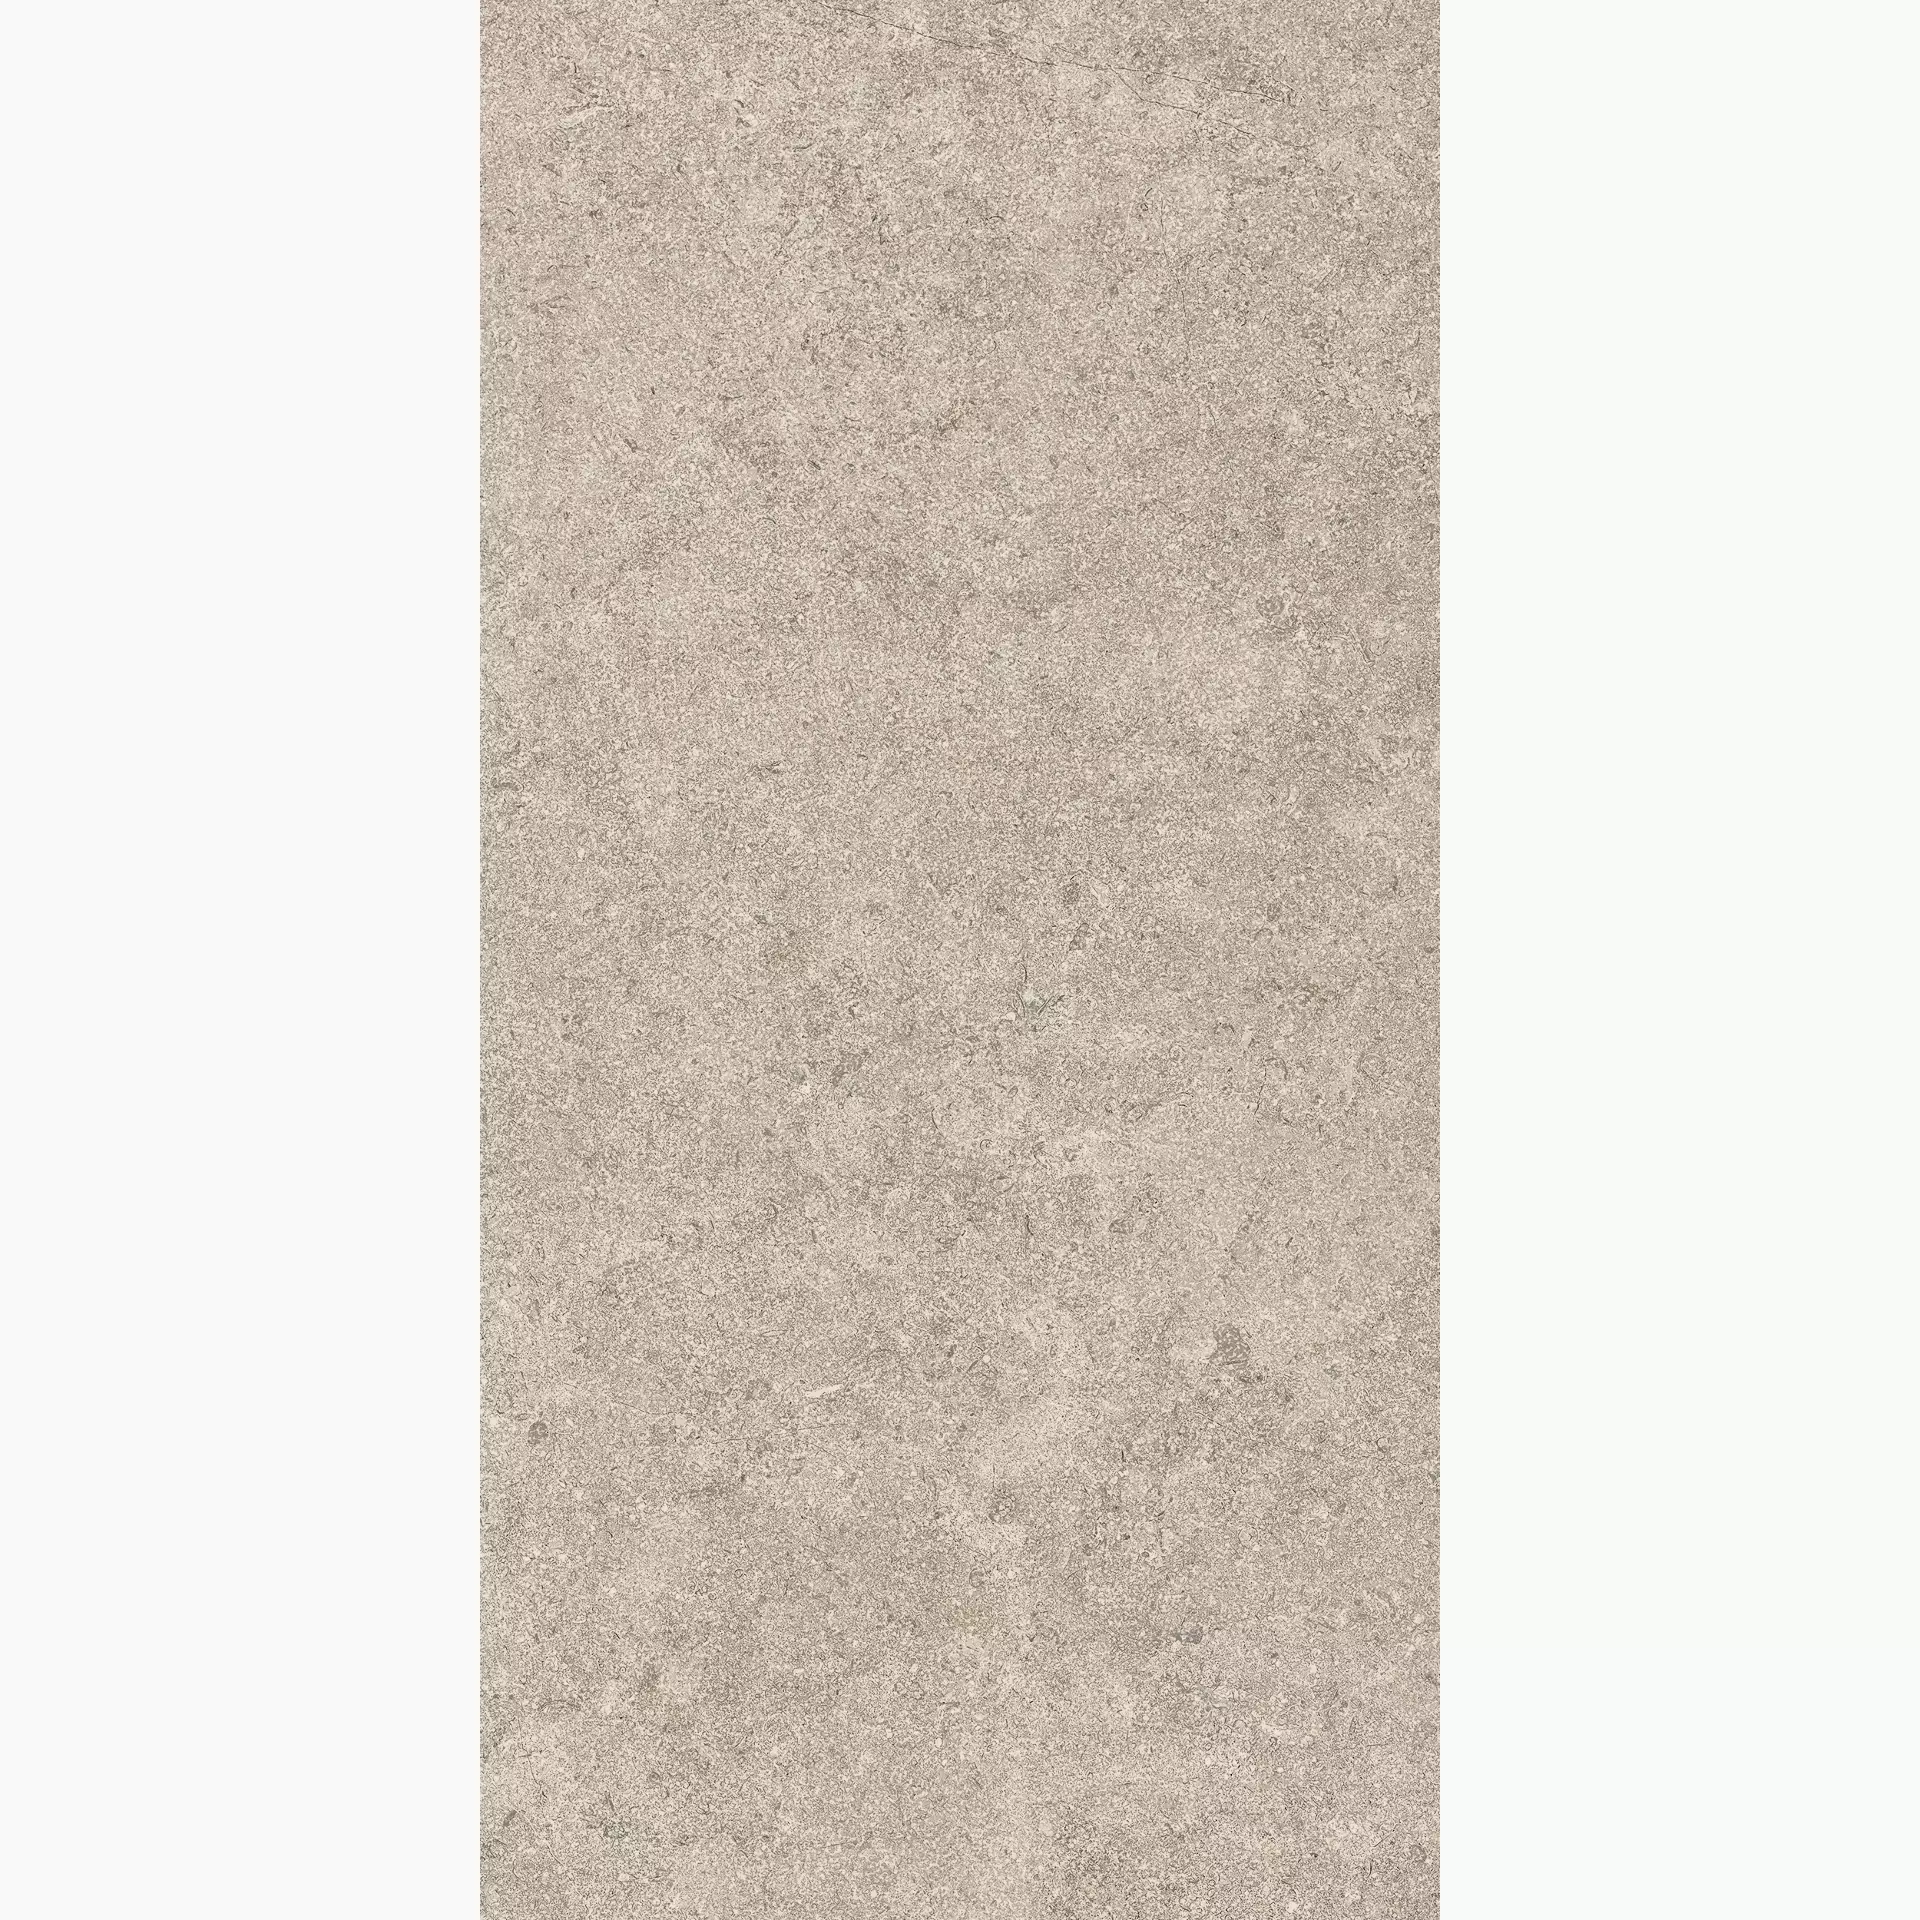 Cottodeste Pura Sand Rolled Protect EG-PR35 30x60cm rectified 14mm